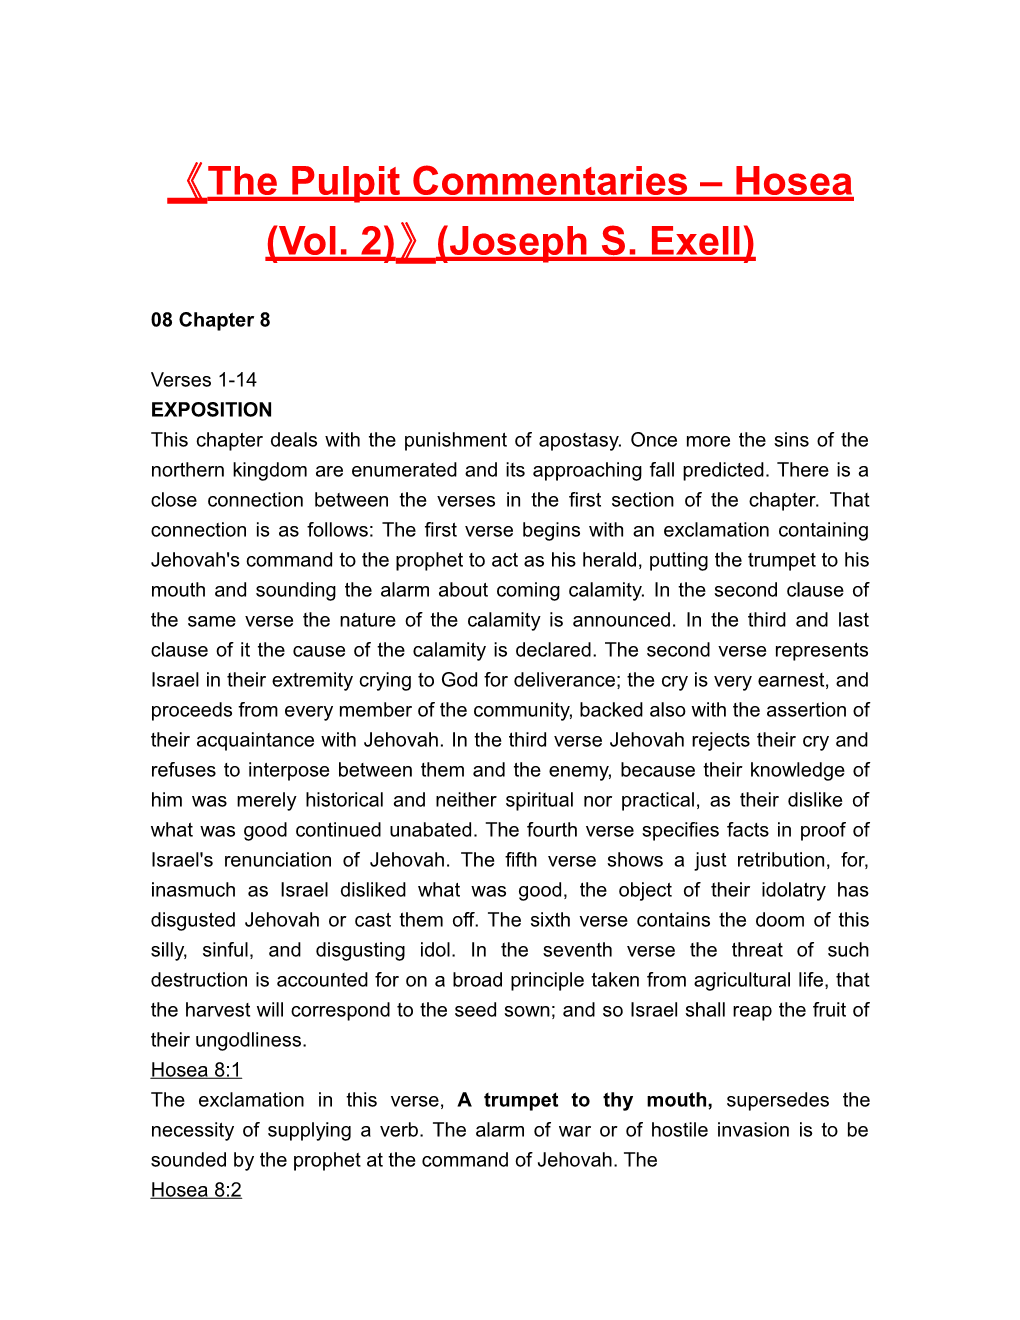 The Pulpit Commentaries Hosea (Vol. 2) (Joseph S. Exell)